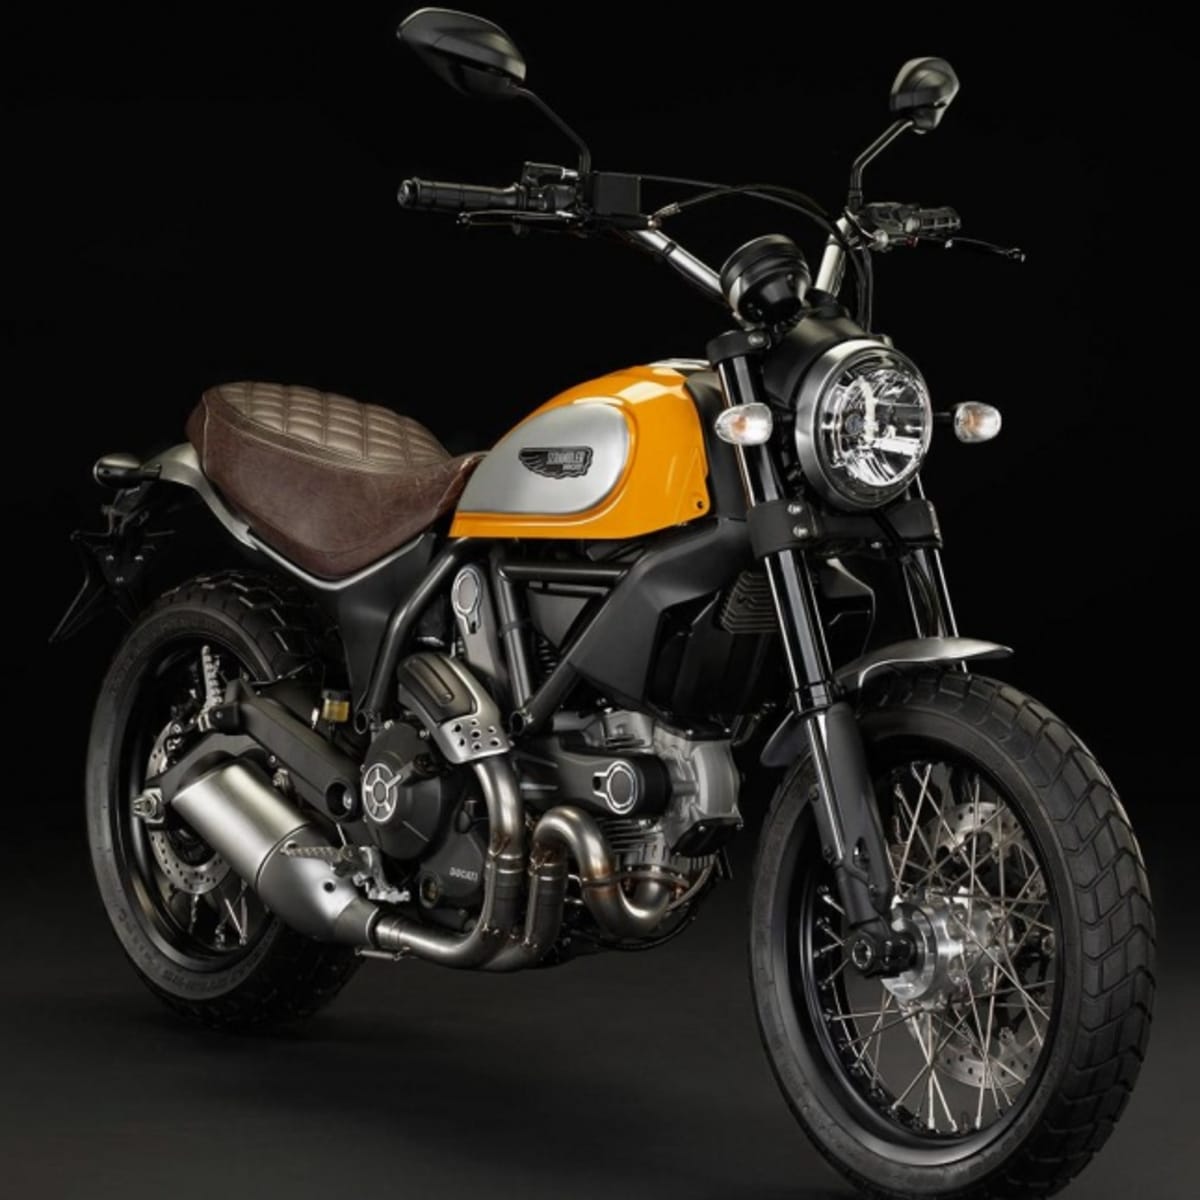 Retro Shock Porn - Why The All-New Retro-Inspired Ducati Scrambler Is The Motorcycle For You -  Airows